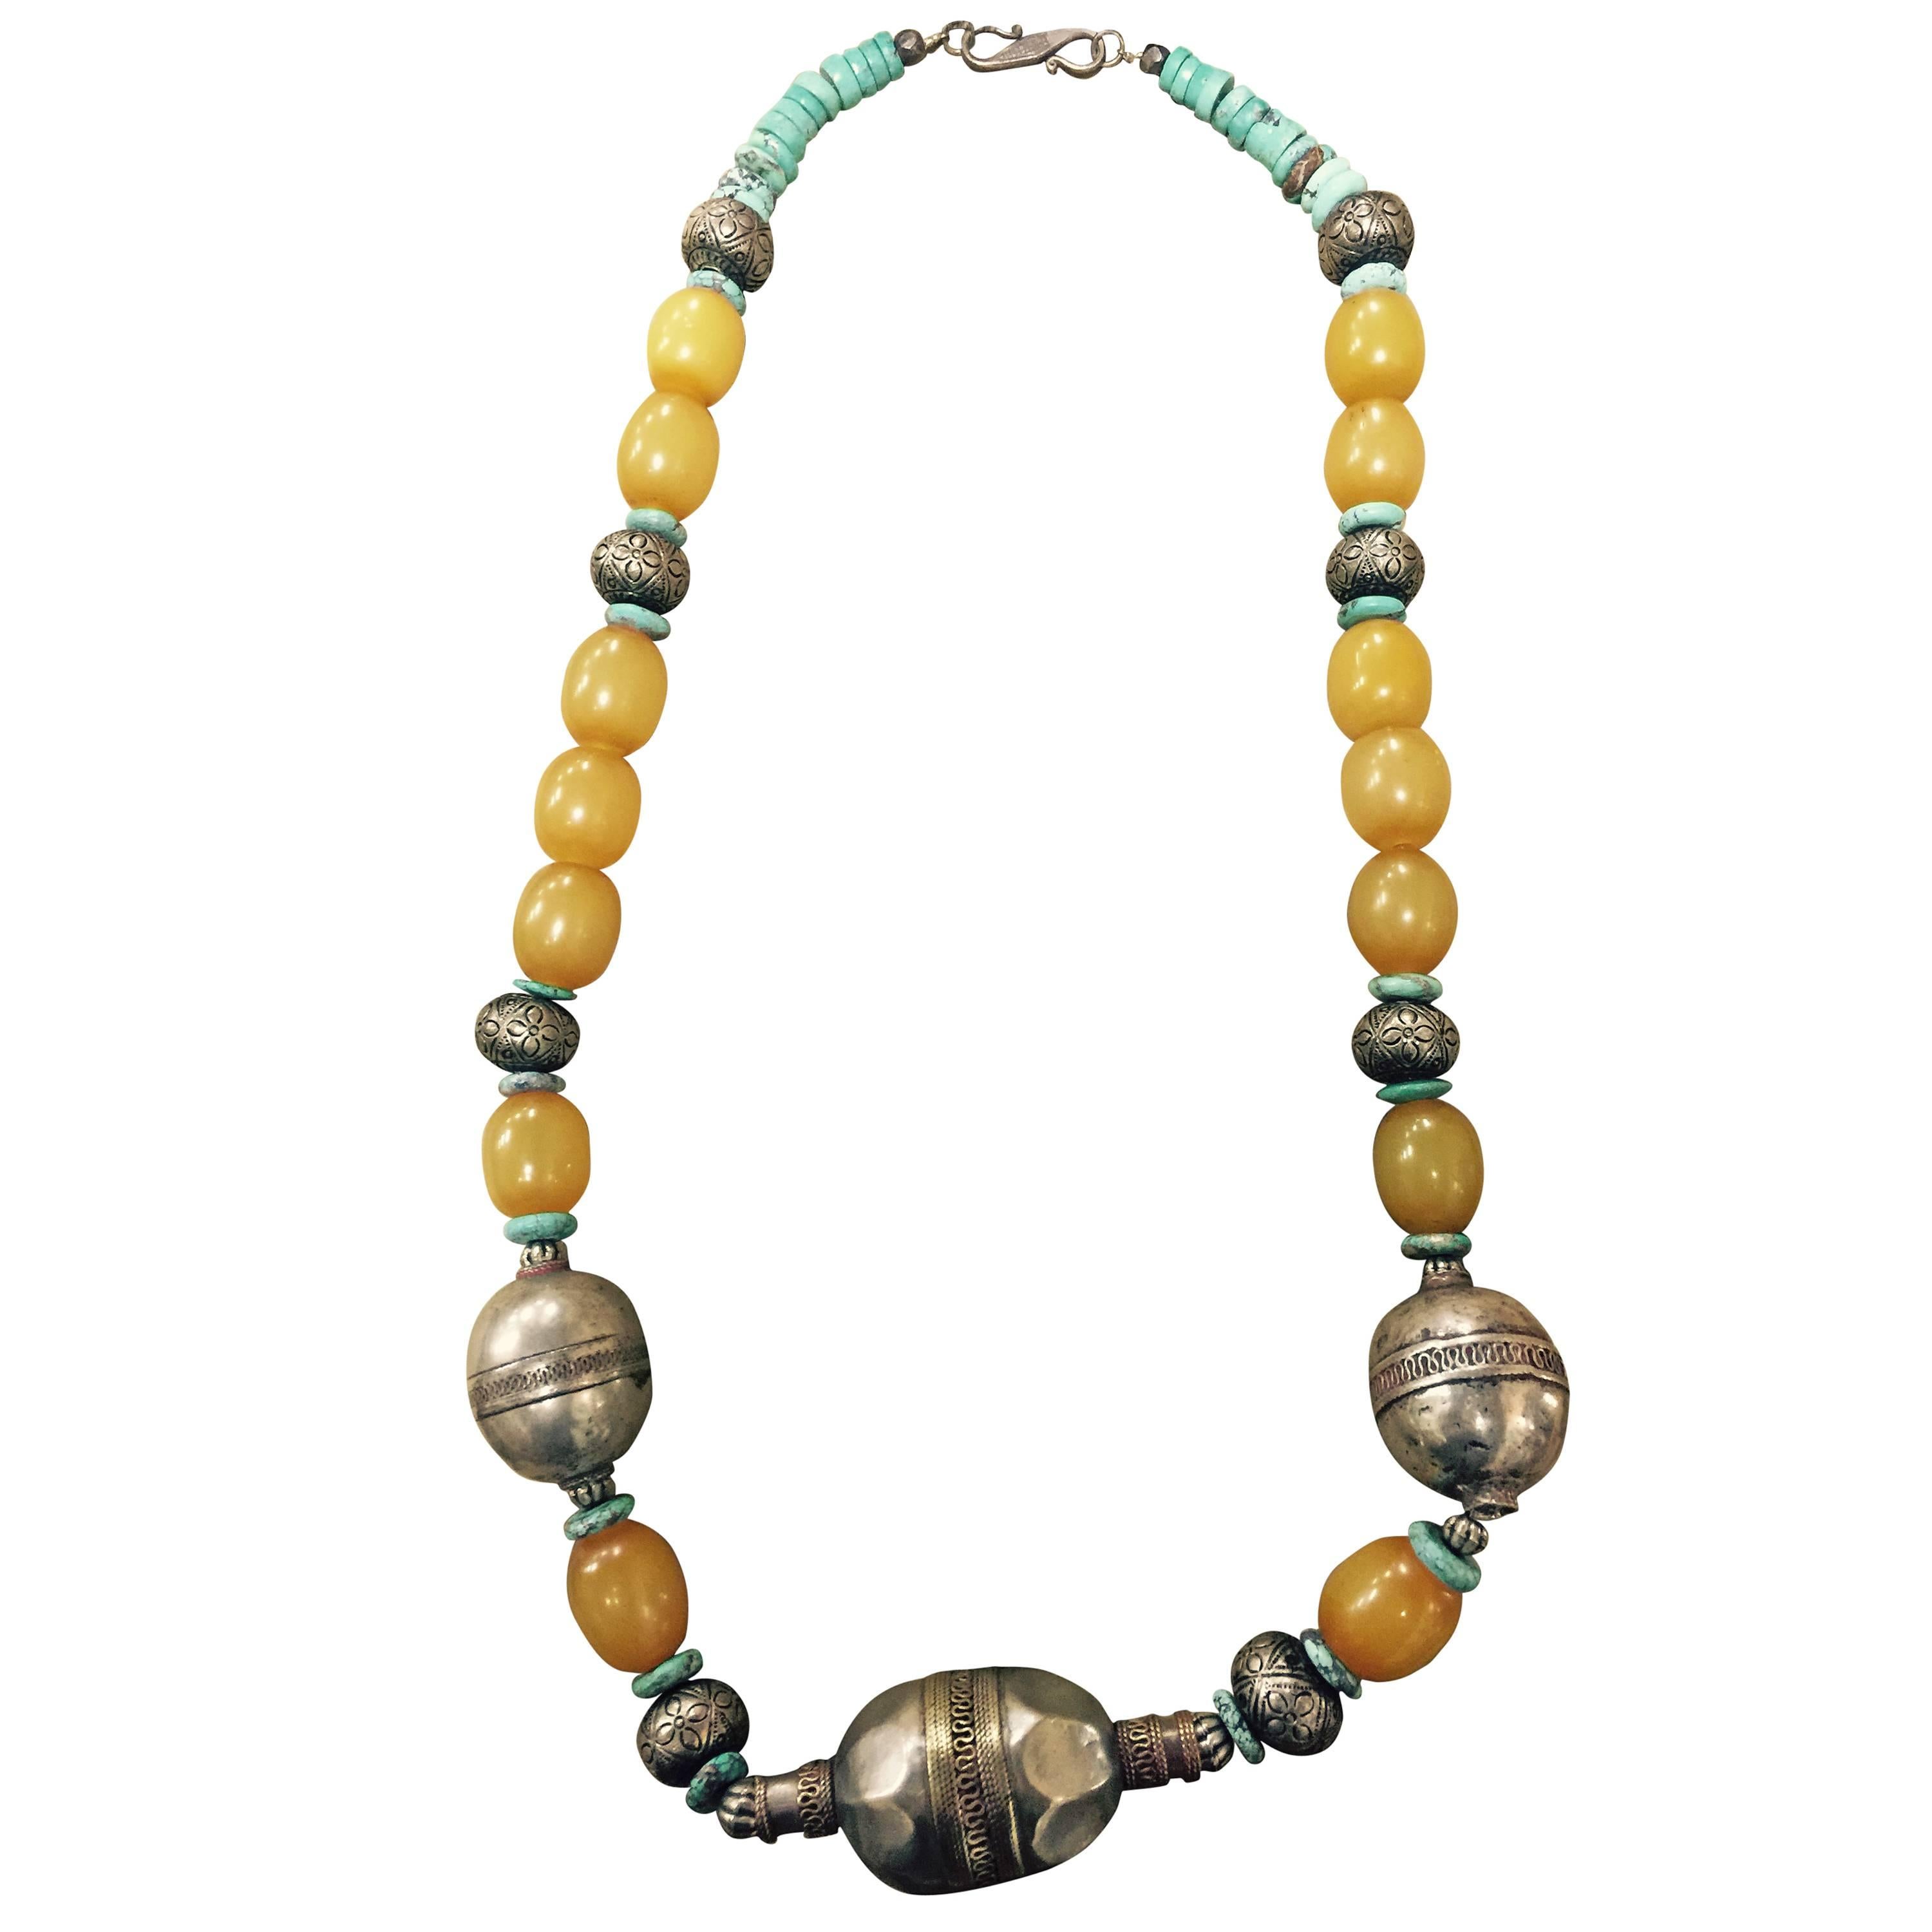 Necklace Tribal Turquoise Beads and Large Metal and Yellow Beads